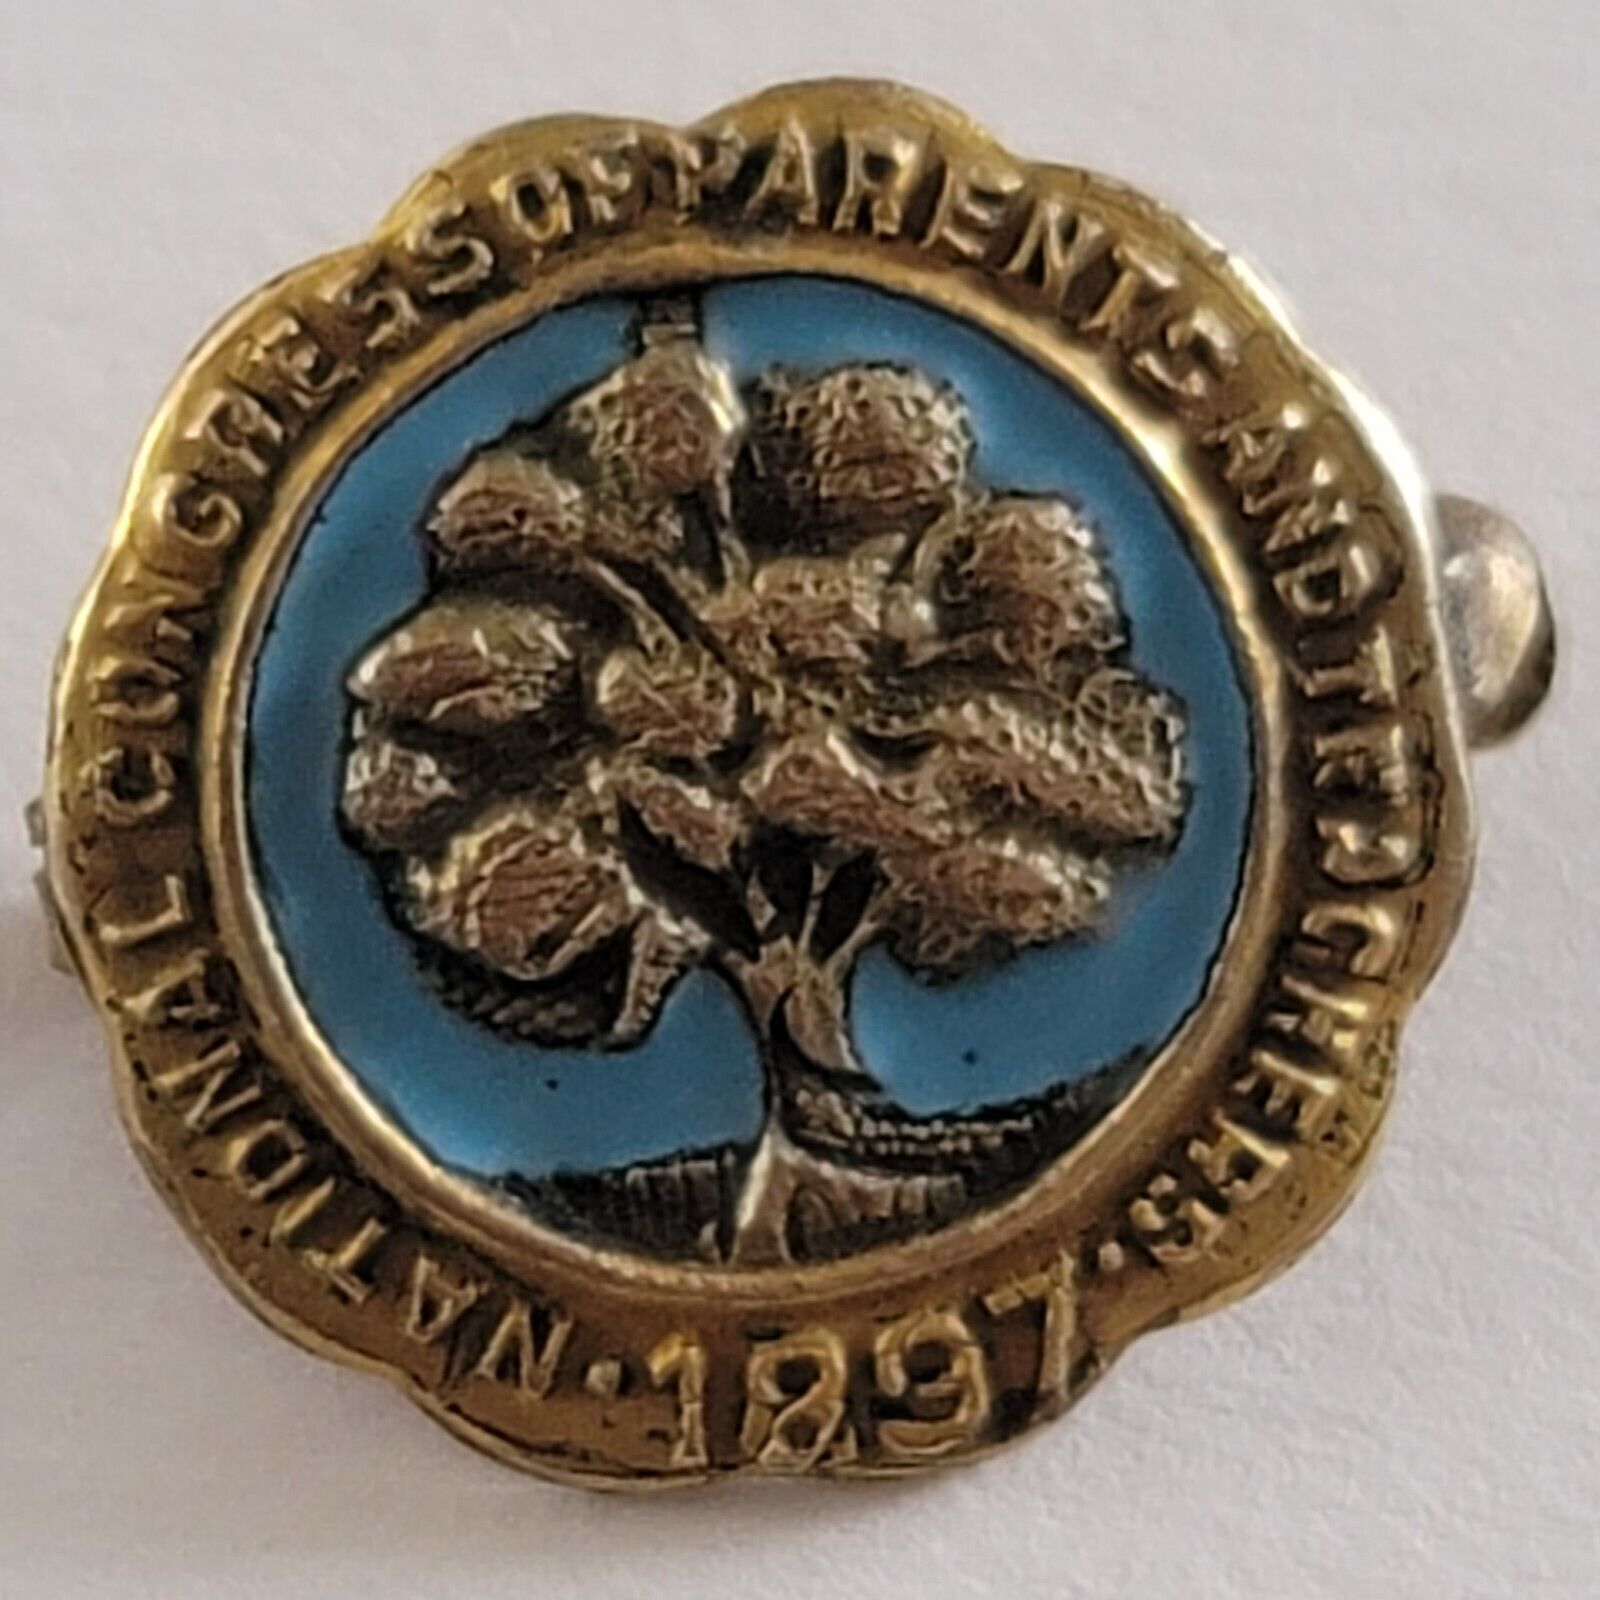 National Congress of Parents and Teachers 1897 Lapel Hat Pin Vintage